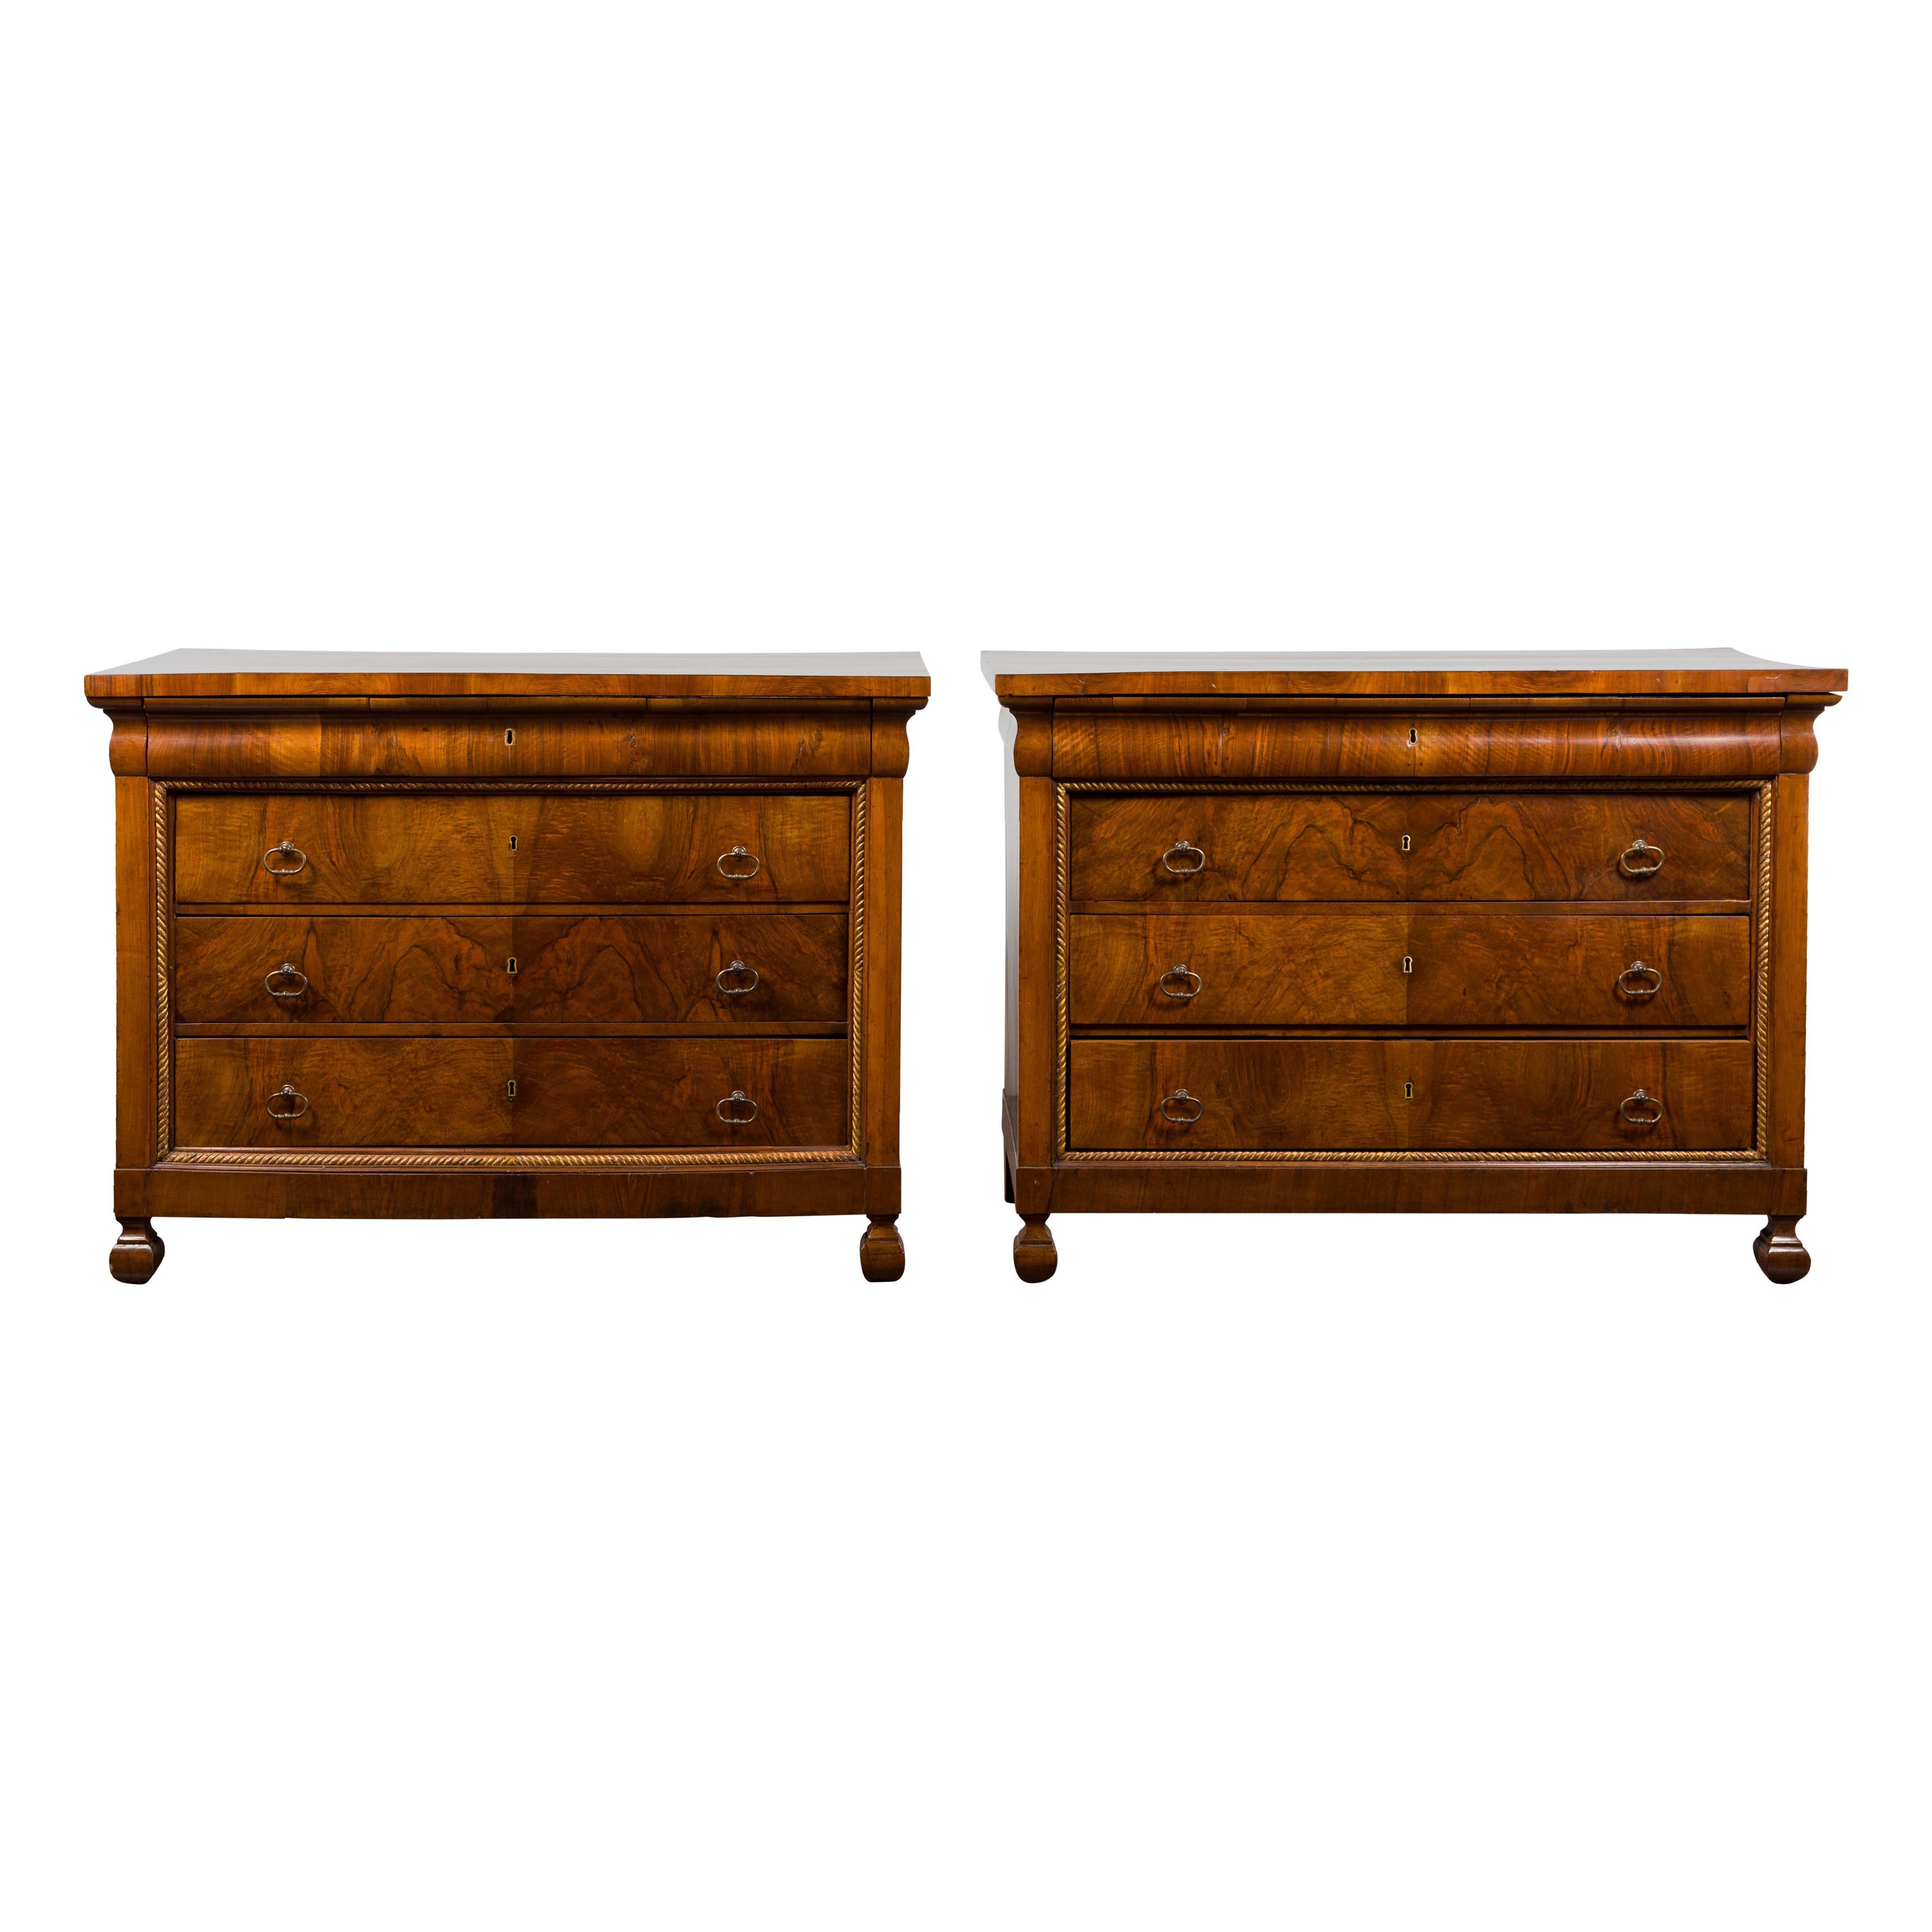 Pair of Italian 18th Century Walnut Four-Drawer Commodes with Bookmatched Veneer For Sale